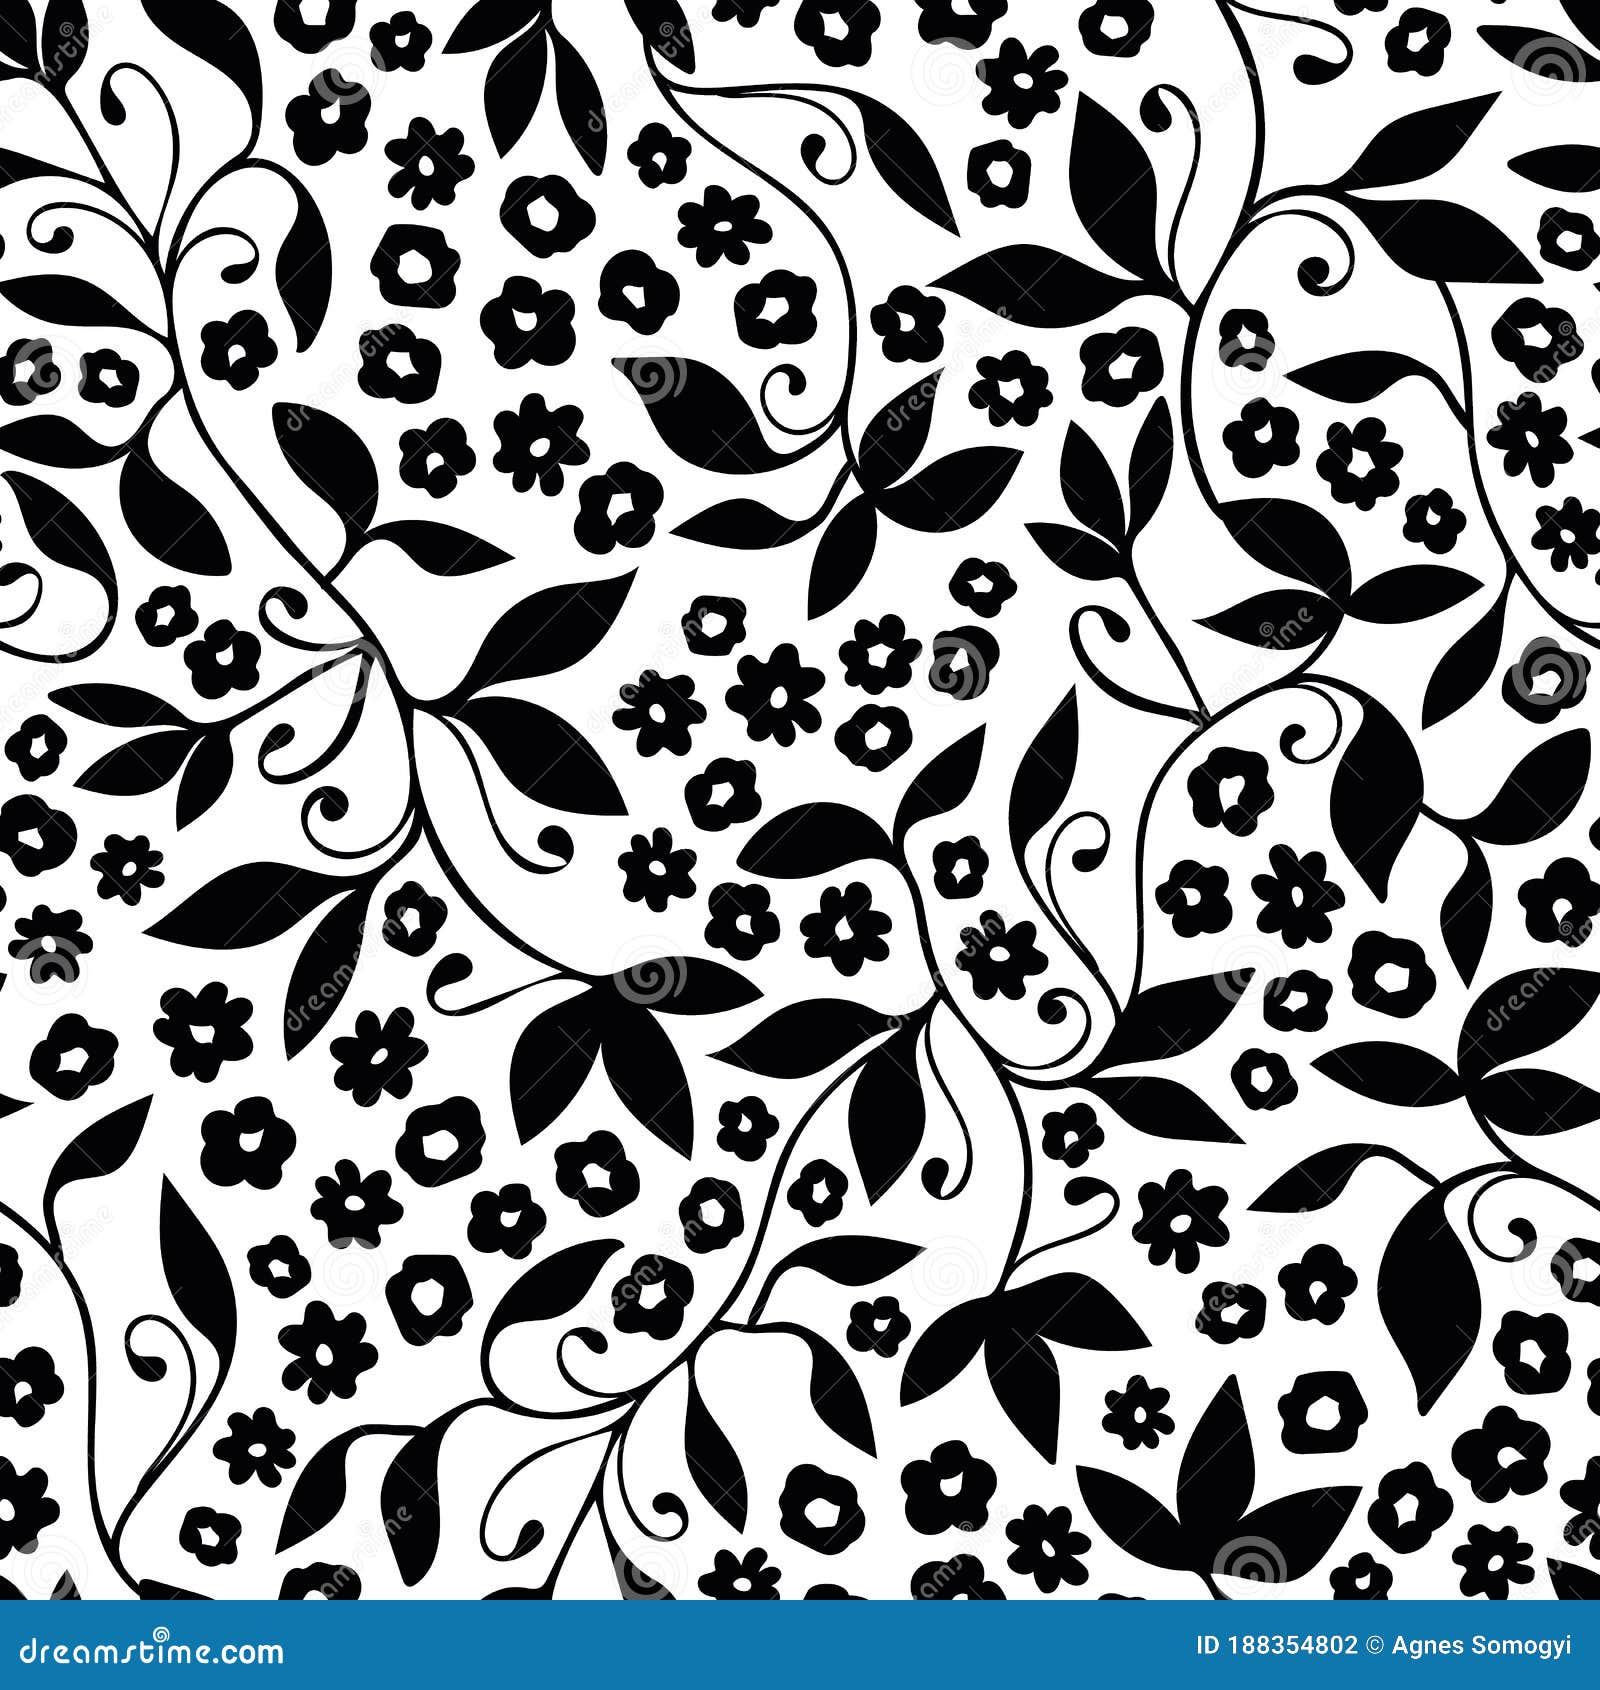 Black and White Ditsy Floral with Tendril Seamless Vector Pattern ...